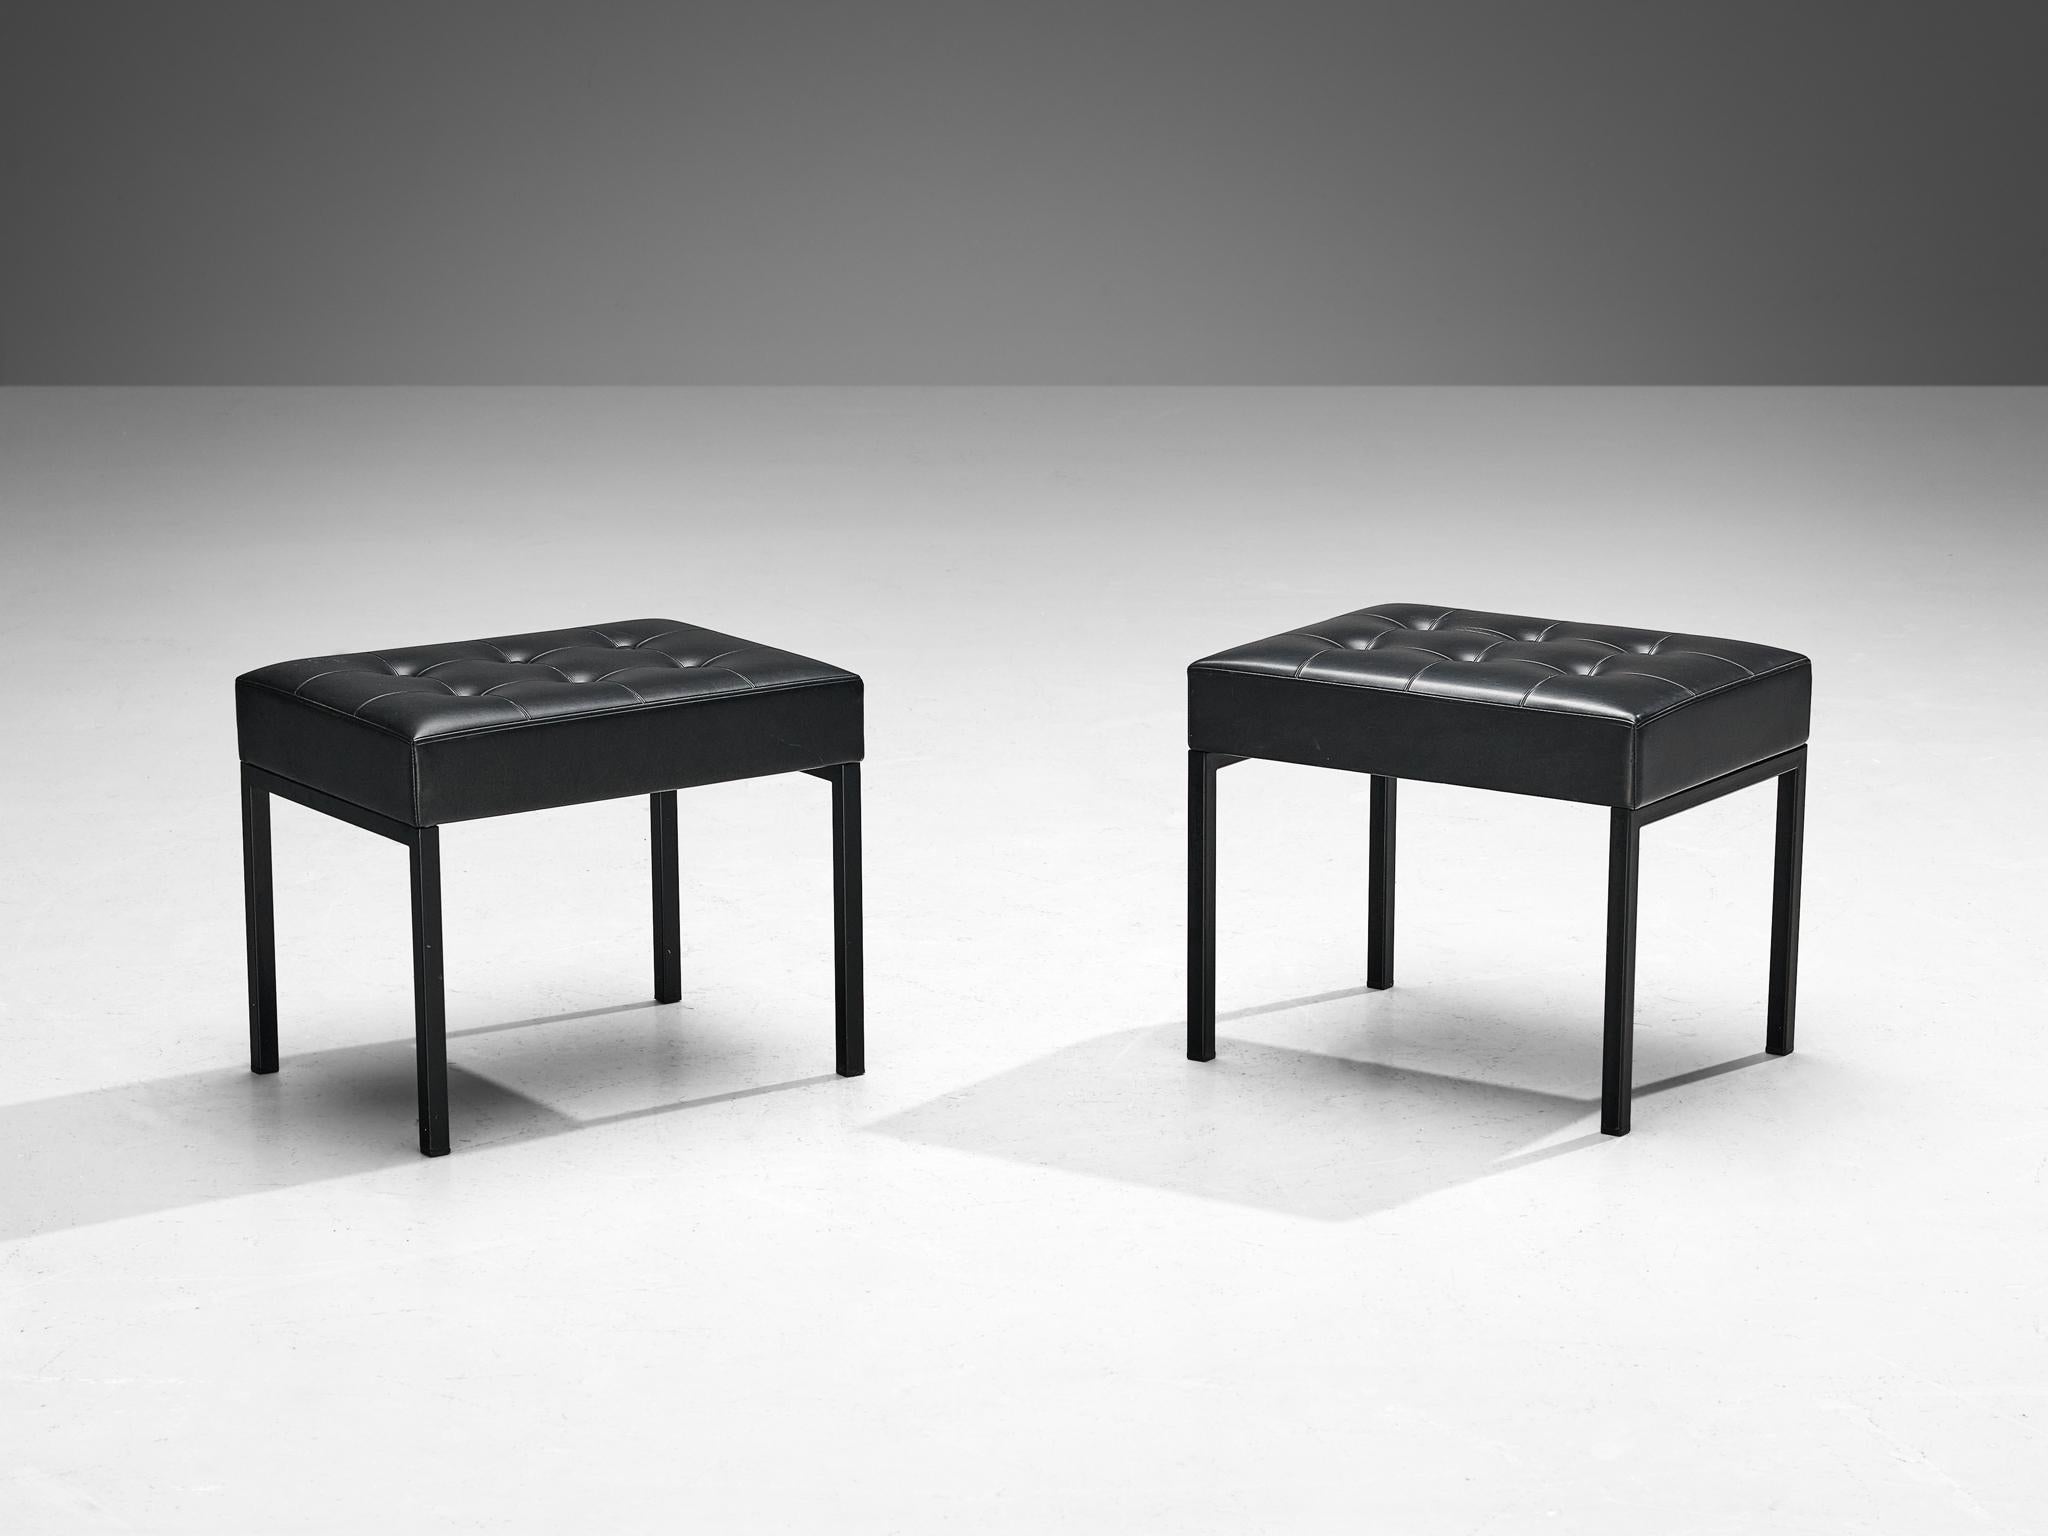 Stools or ottomans, metal, leatherette, Europe, 1960s

A sleek pair of stools made in Europe in the 1960s. This midcentury modern design is a wonderful addition to any interior, due to its minimalist aesthetic. The stool is equipped with a tufted